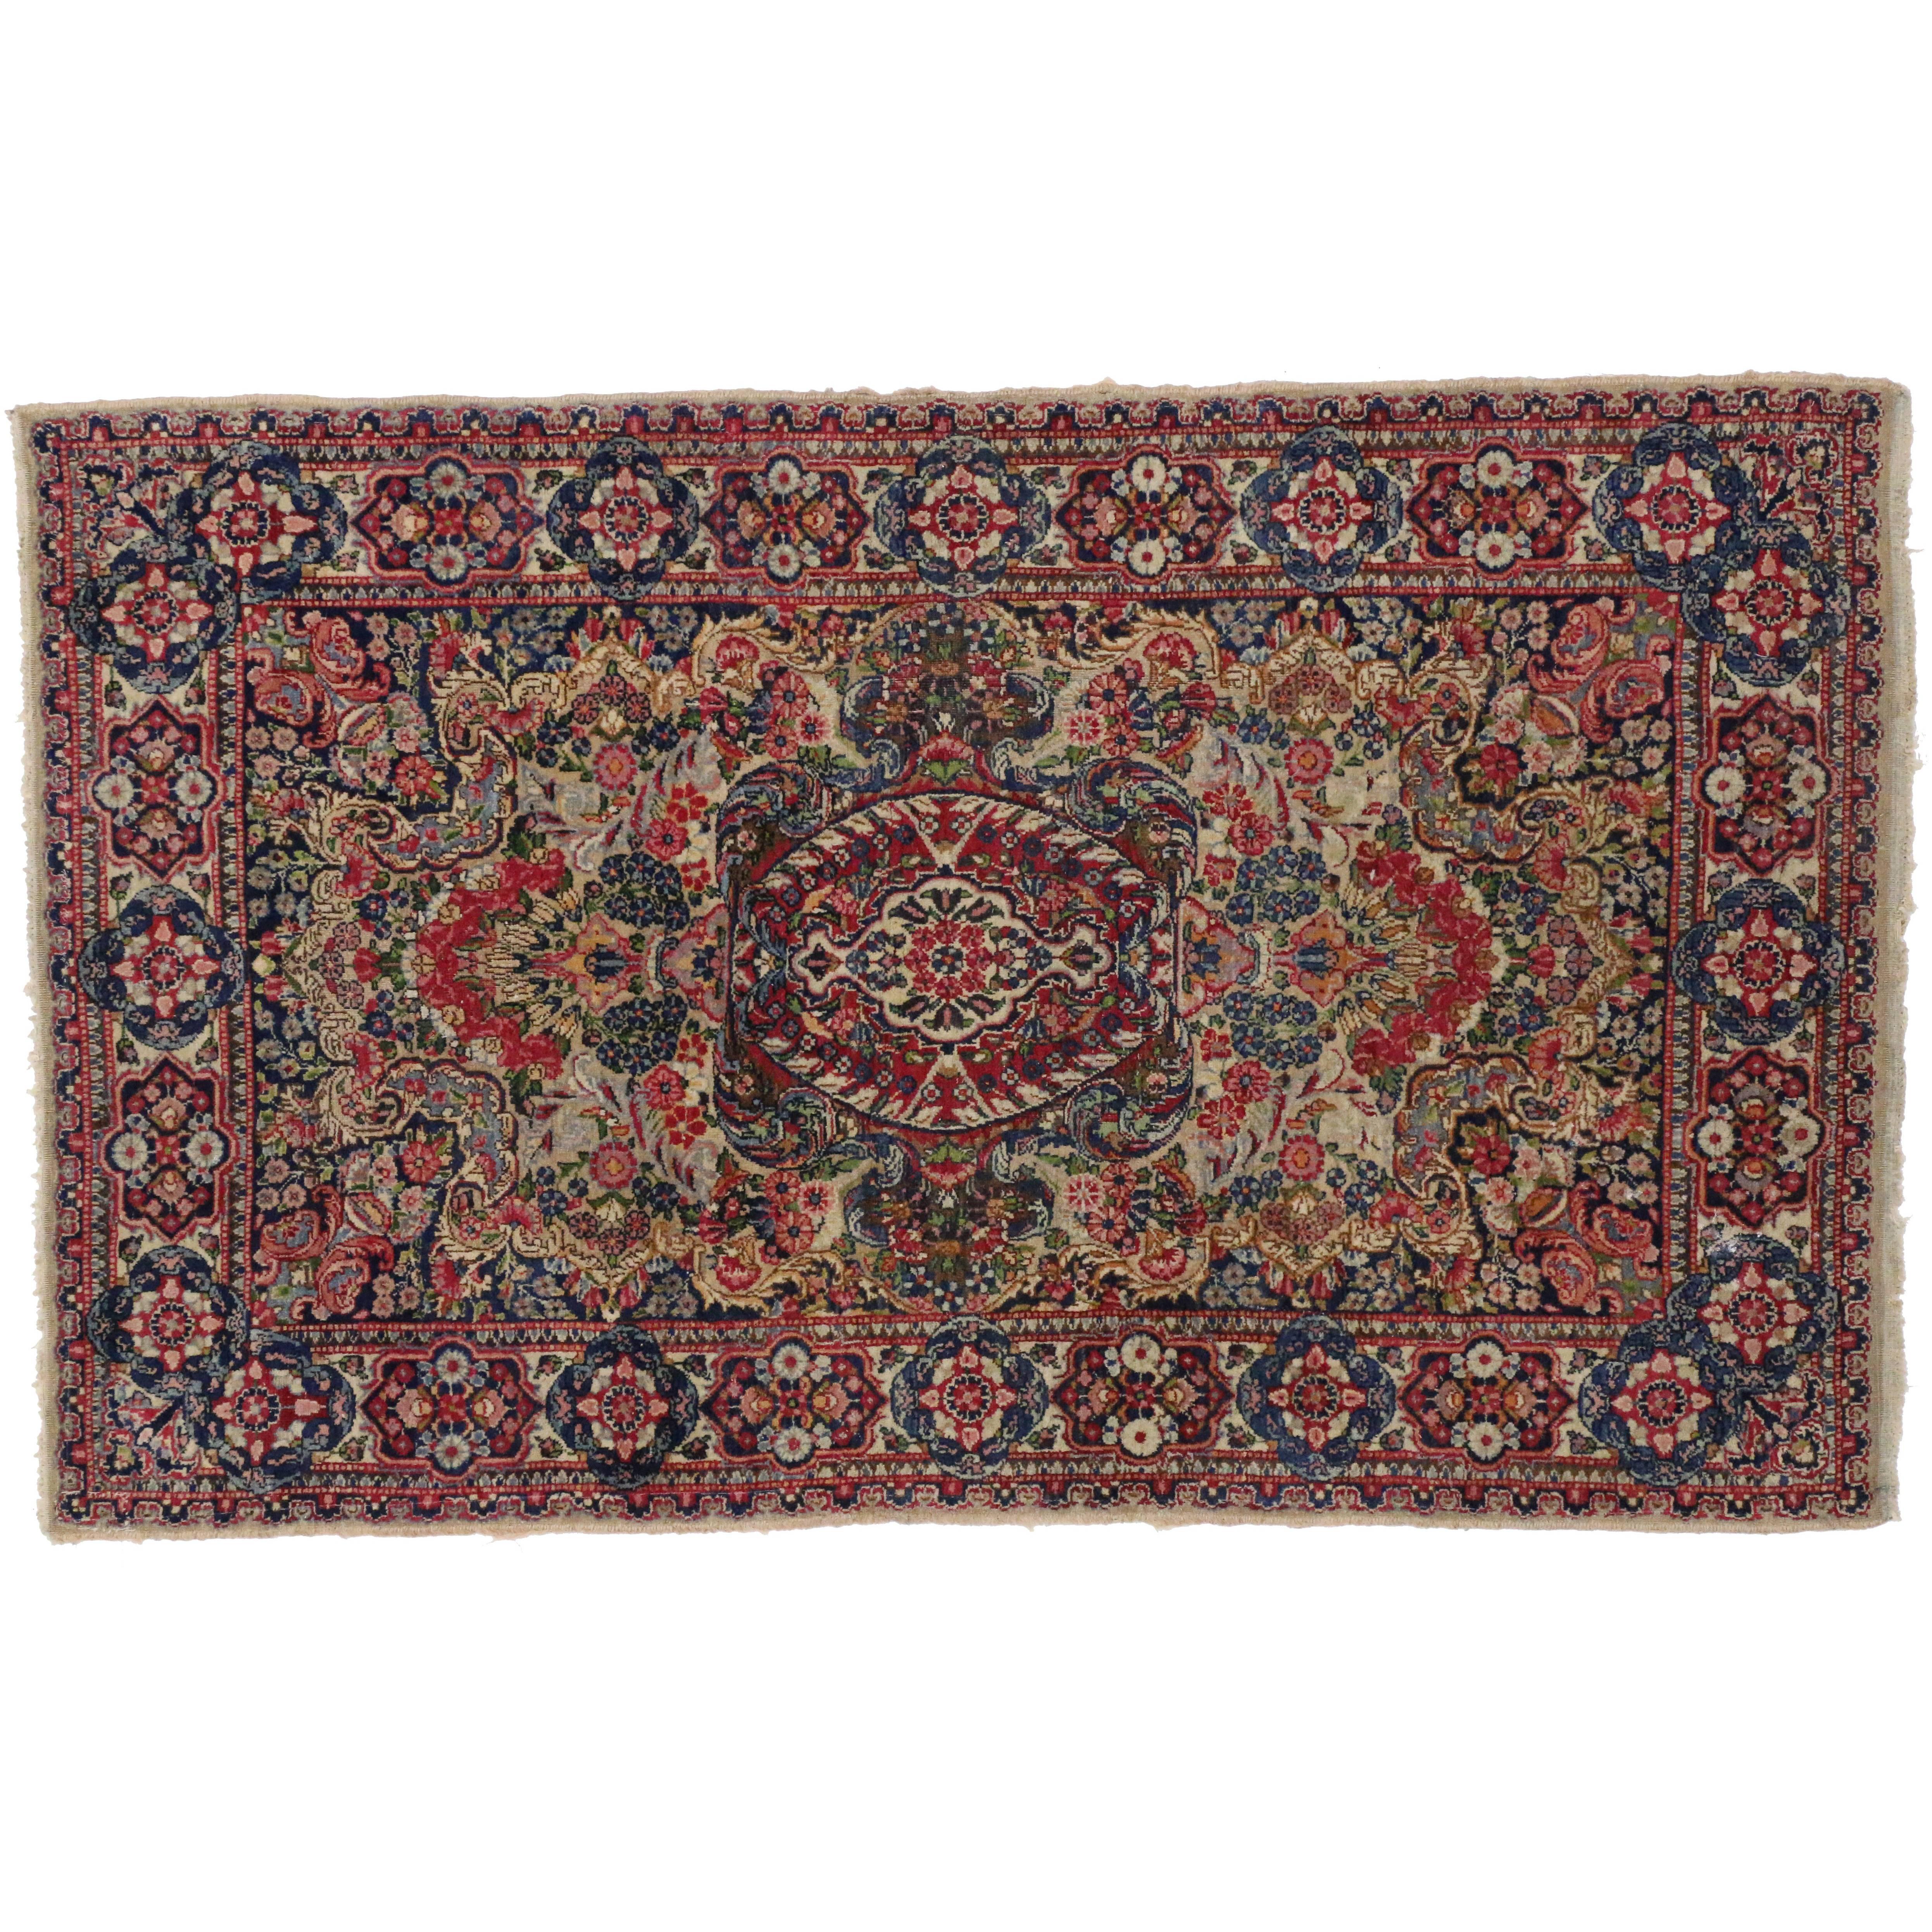 Antique Persian Kerman Rug with French Rococo Style, Small Persian Accent Rug